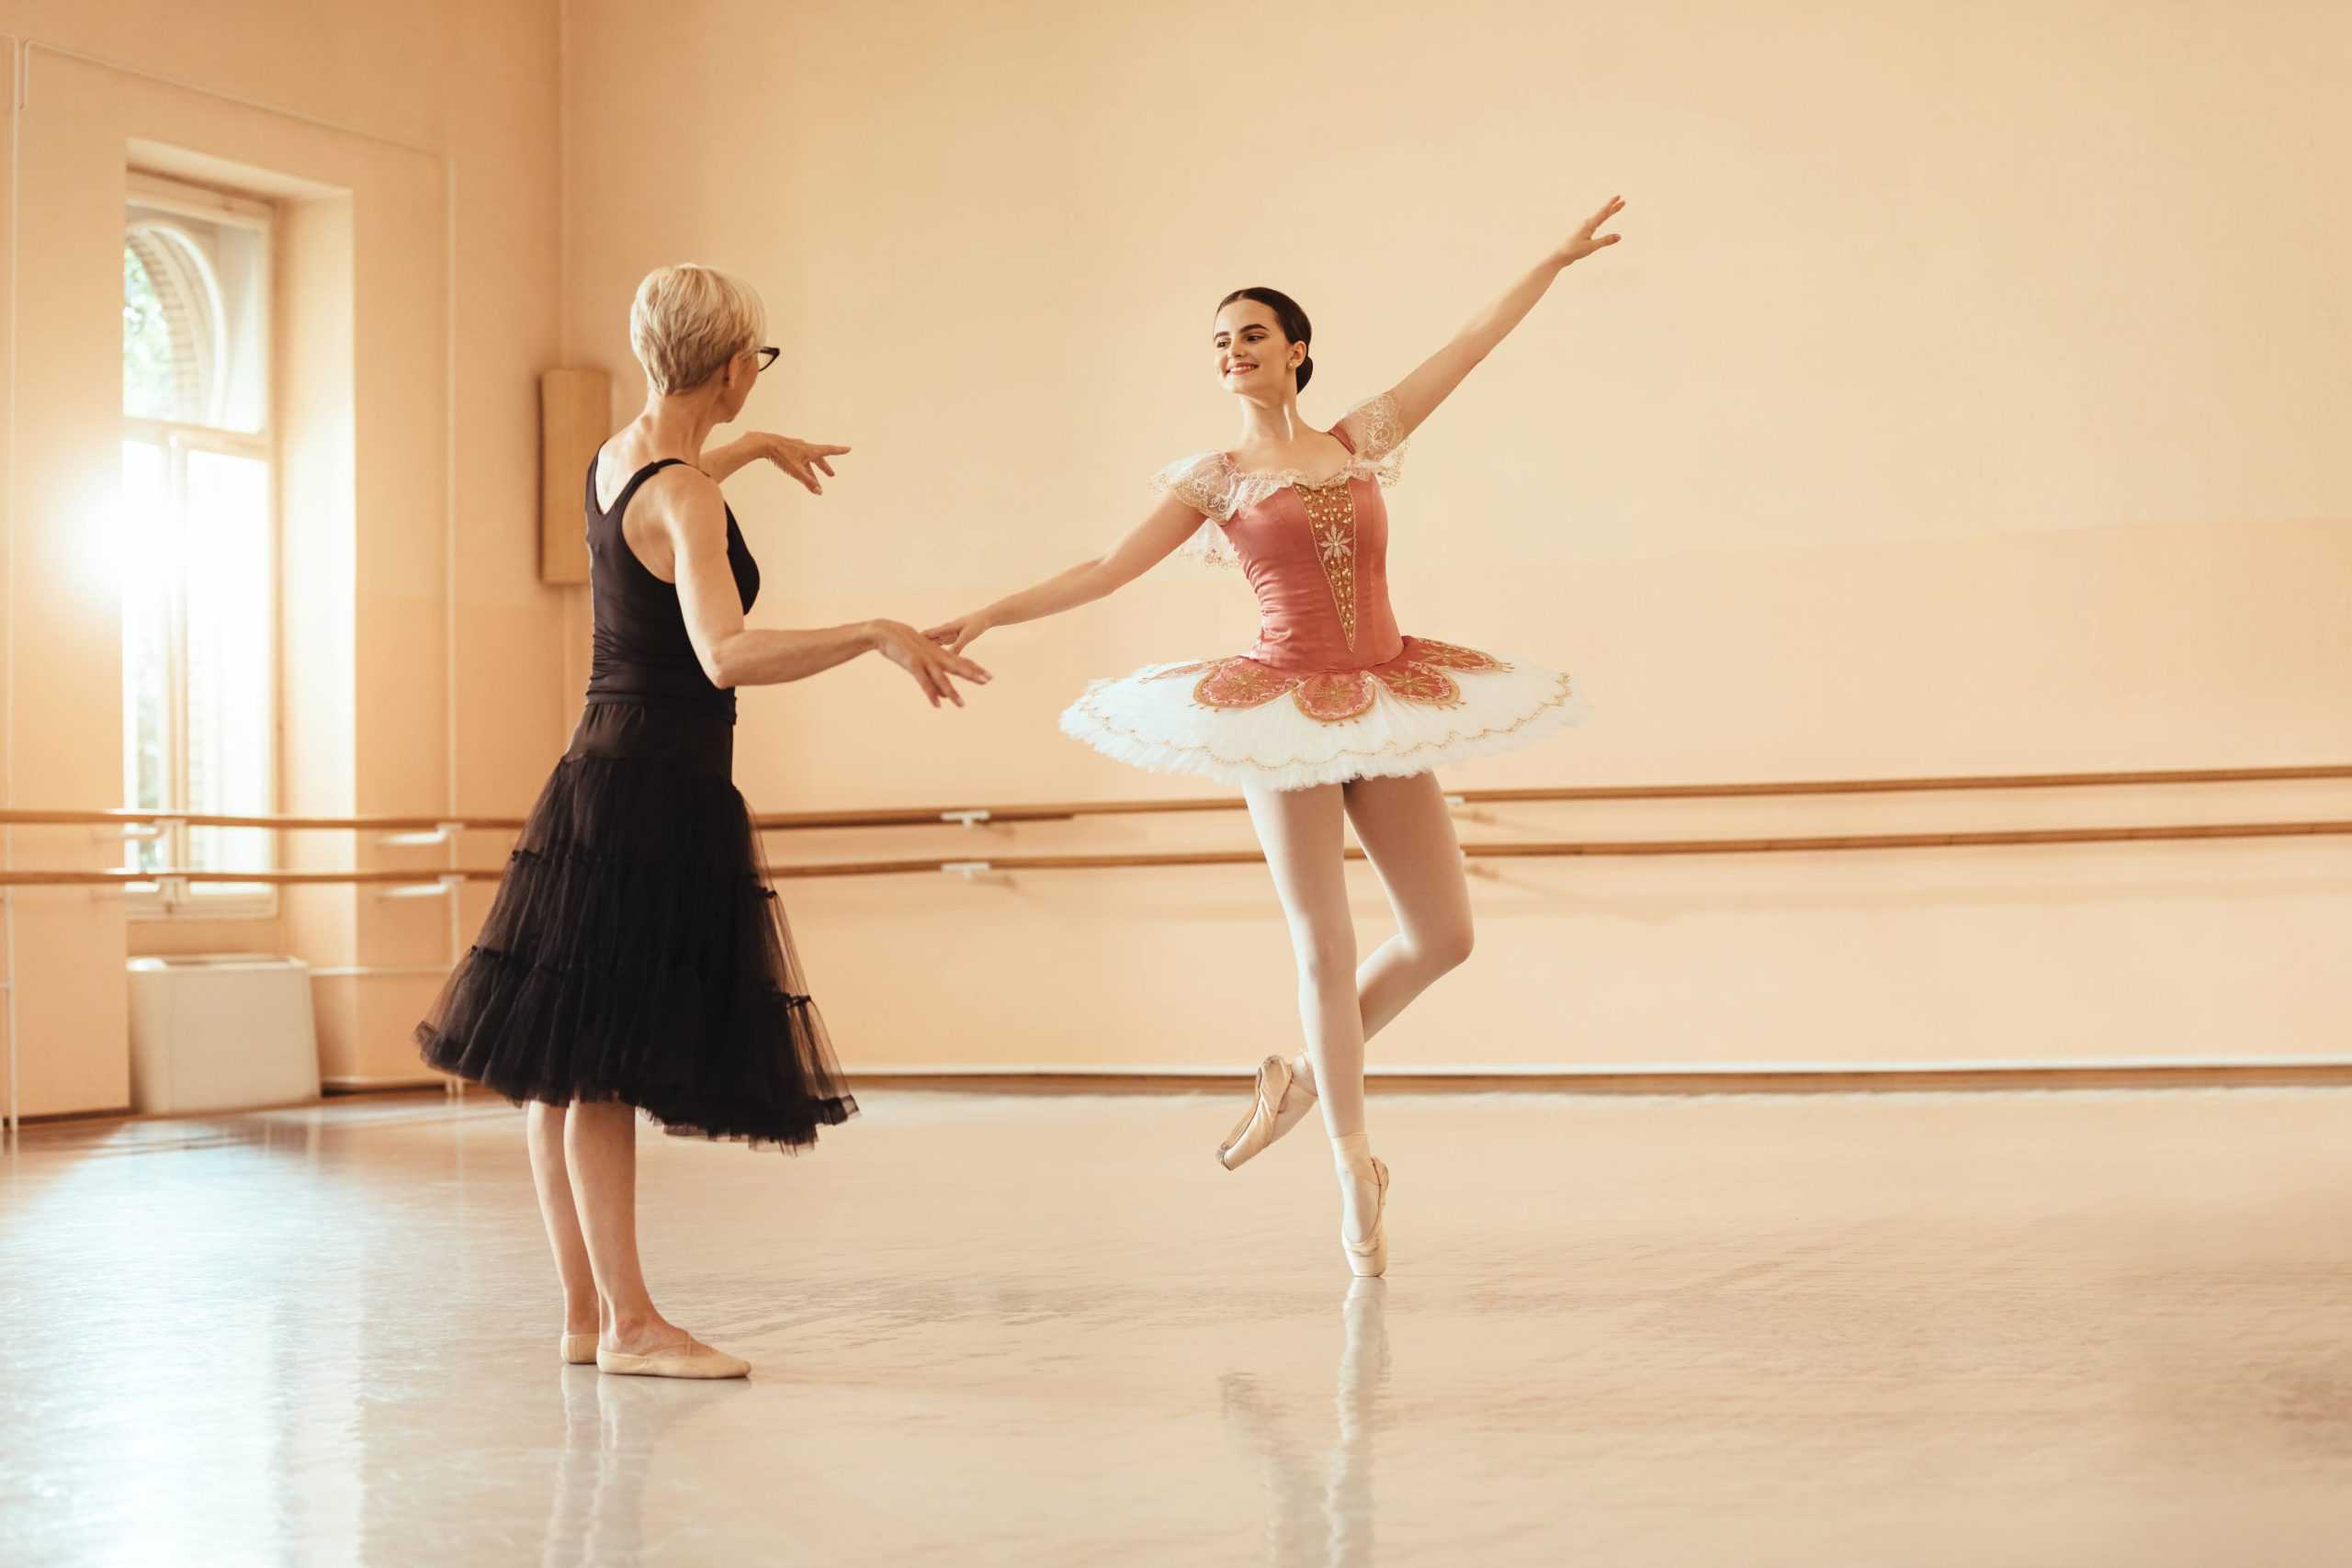 How to find the right private dance instructor for you